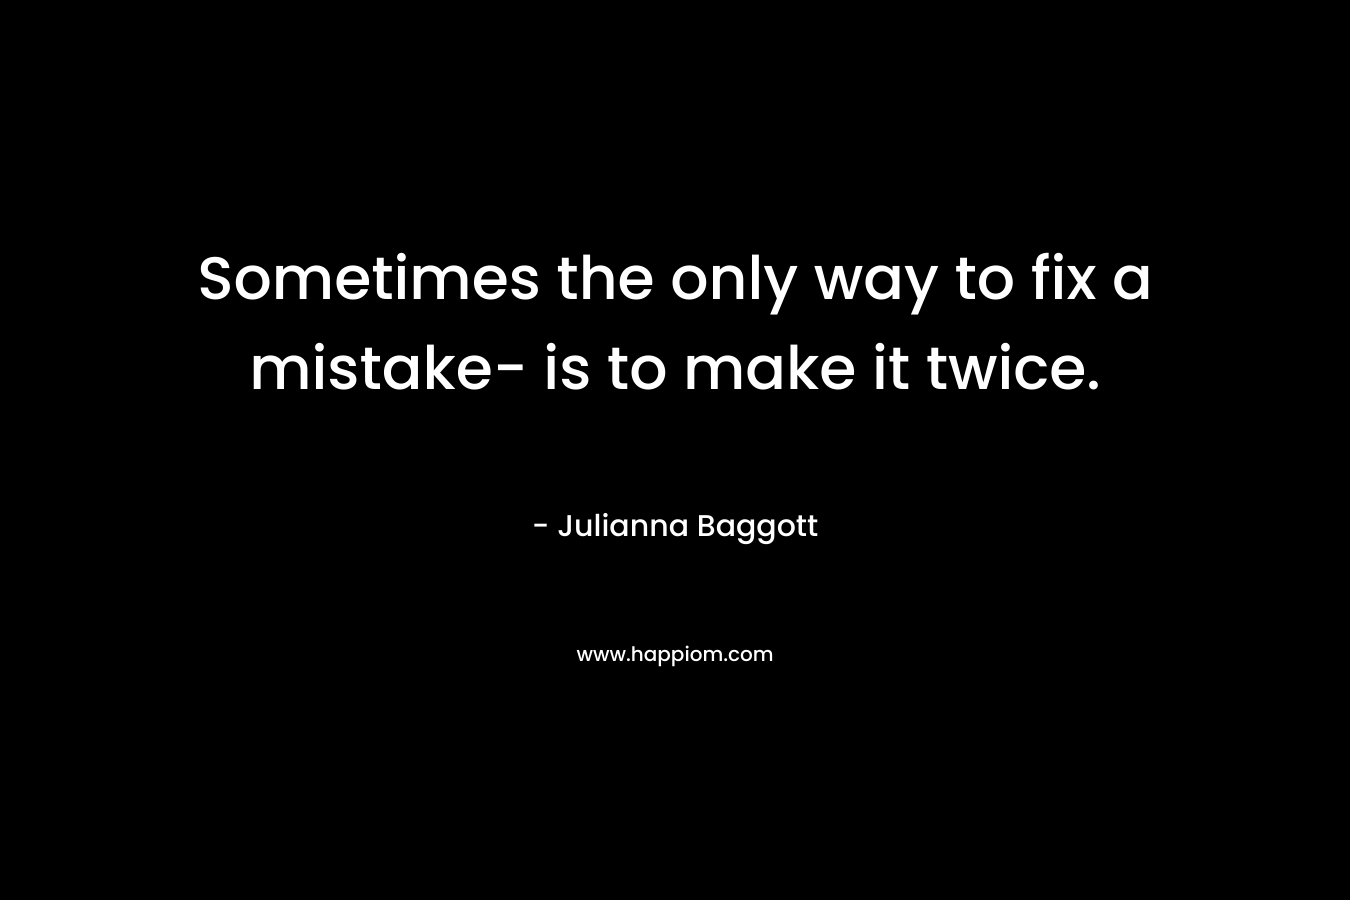 Sometimes the only way to fix a mistake- is to make it twice.